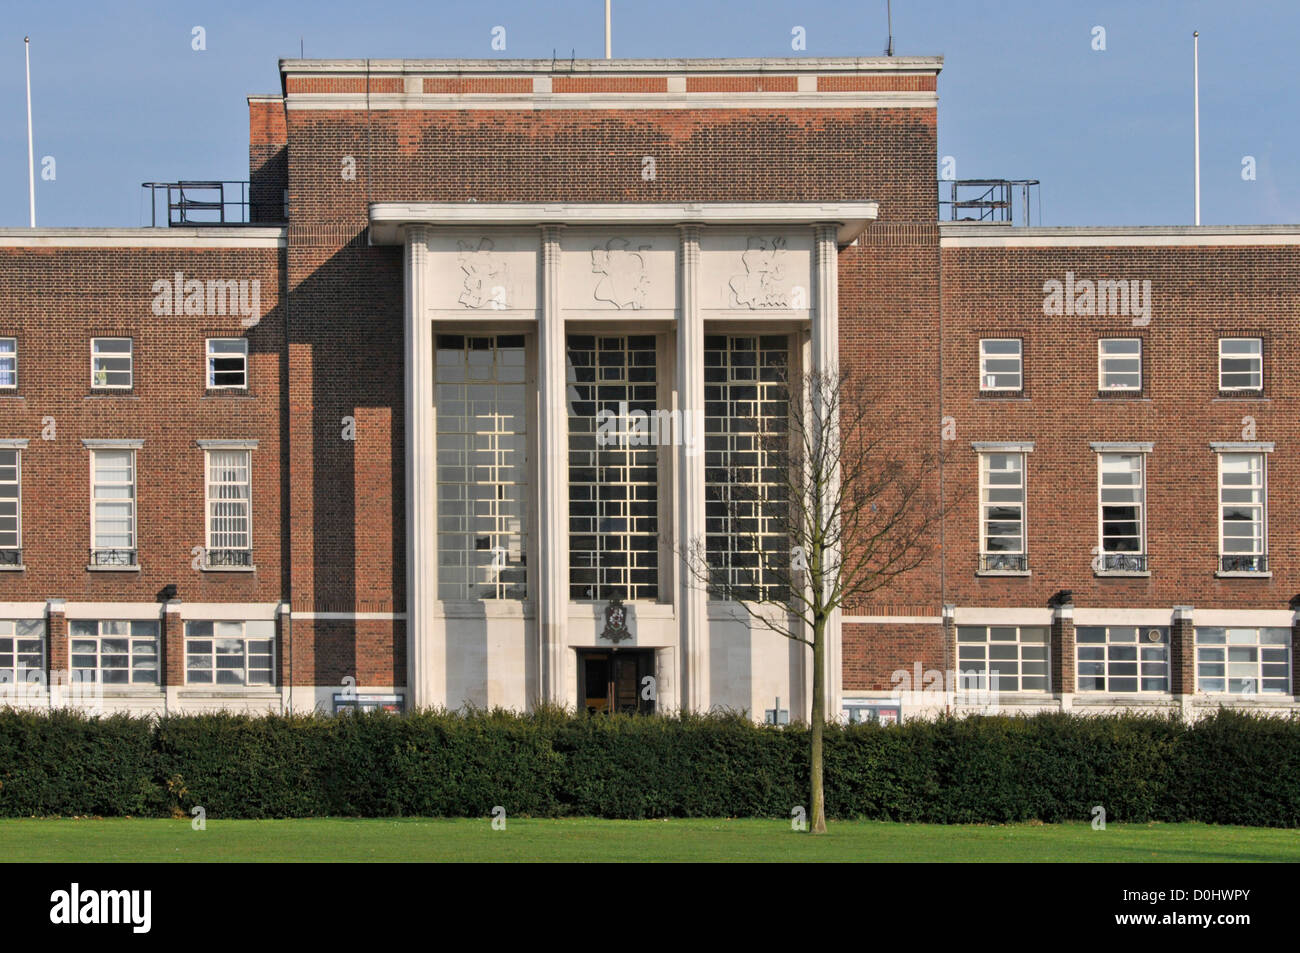 1930s art deco building was former town hall of Dagenham Borough Council now used by the combined London Borough of Barking & Dagenham East London UK Stock Photo